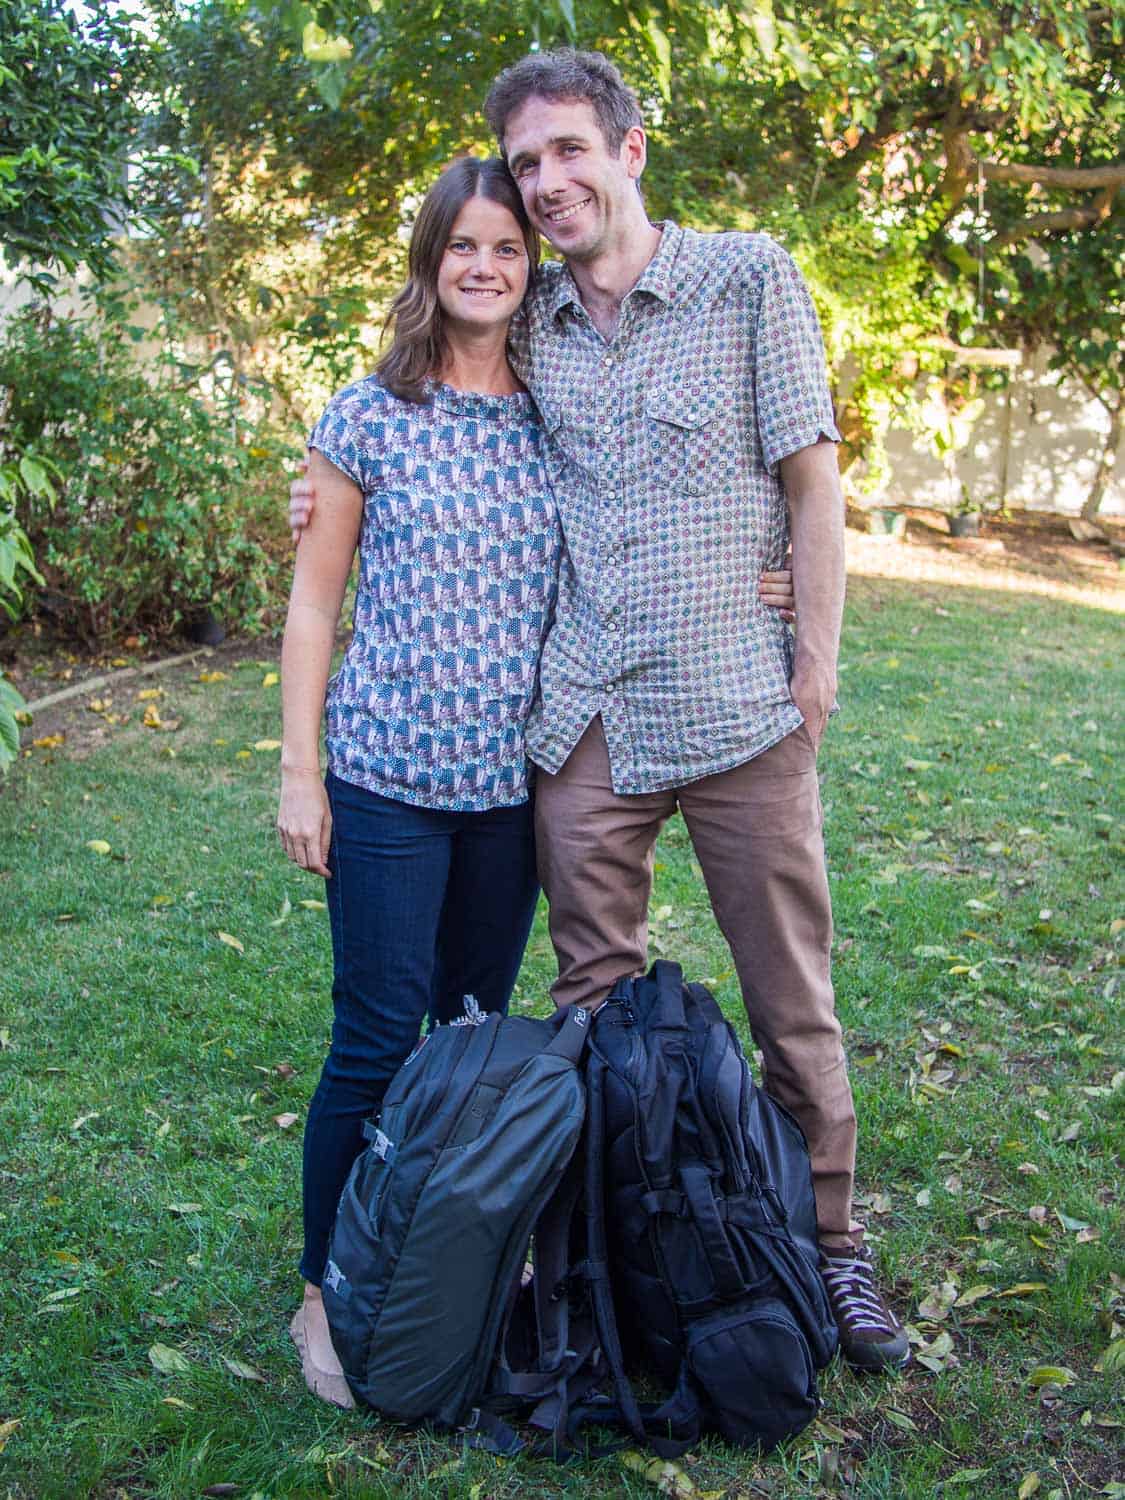 Erin and Simon of Never Ending Voyage with their carry-on backpacks